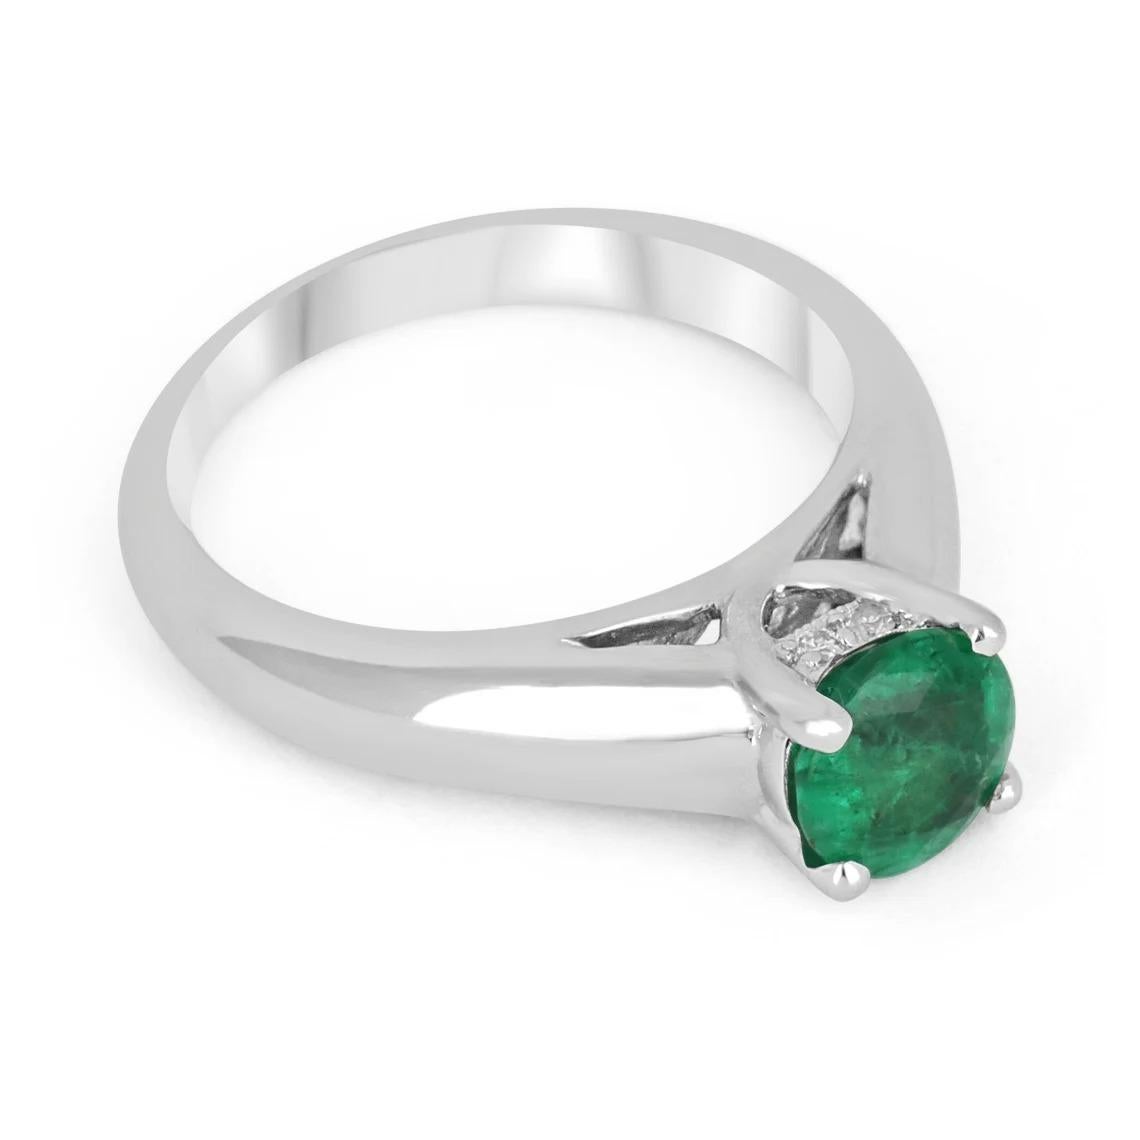 This ring features a 1.30-carat natural emerald, pear cut. Set in a secure four-prong setting, this extraordinary emerald has a stunning radiant rich green color and very good eye clarity, Minor imperfections are normal for genuine emeralds.